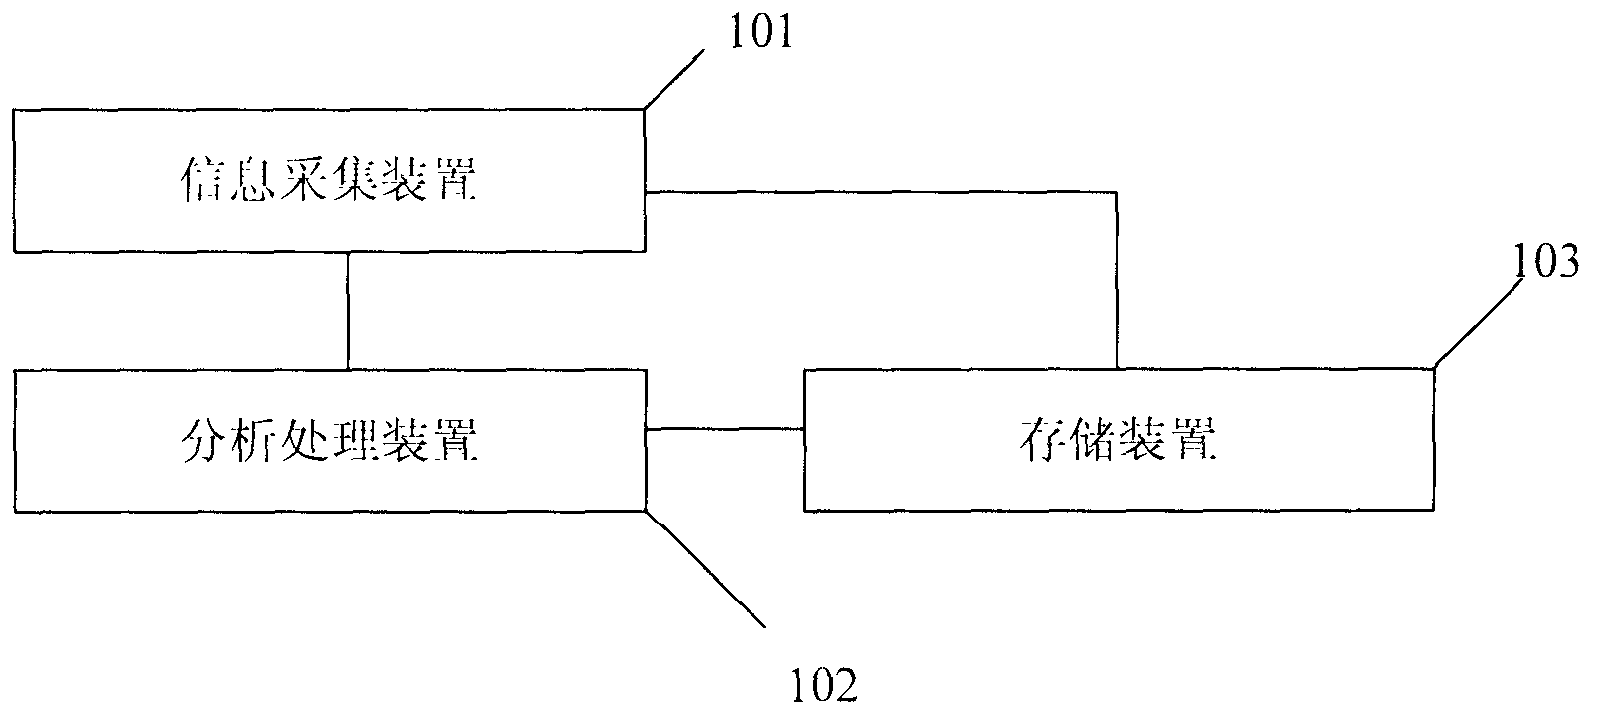 Integrated data collecting device